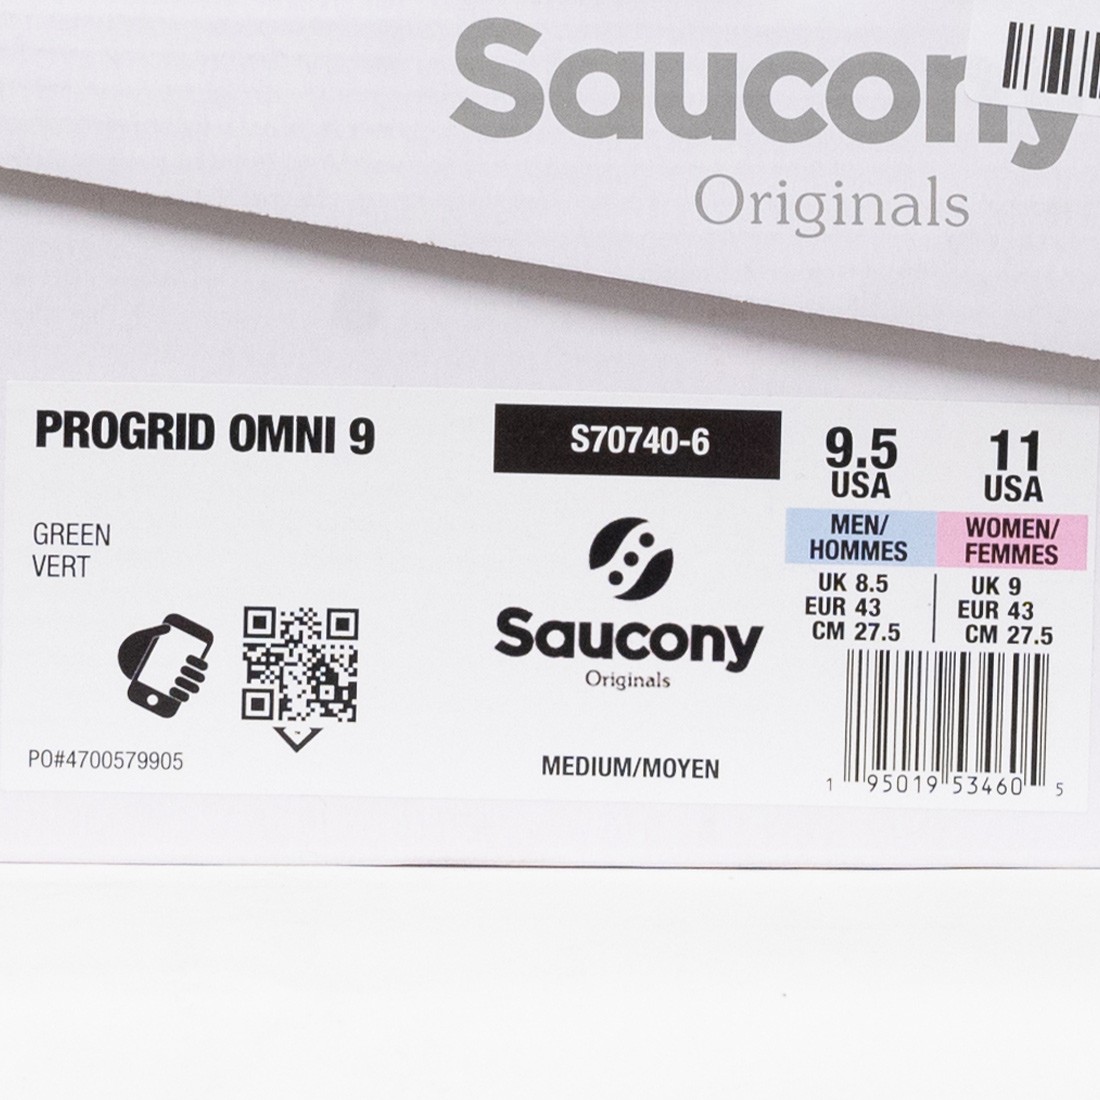 Saucony has experimented with several different upper styles on the Guide